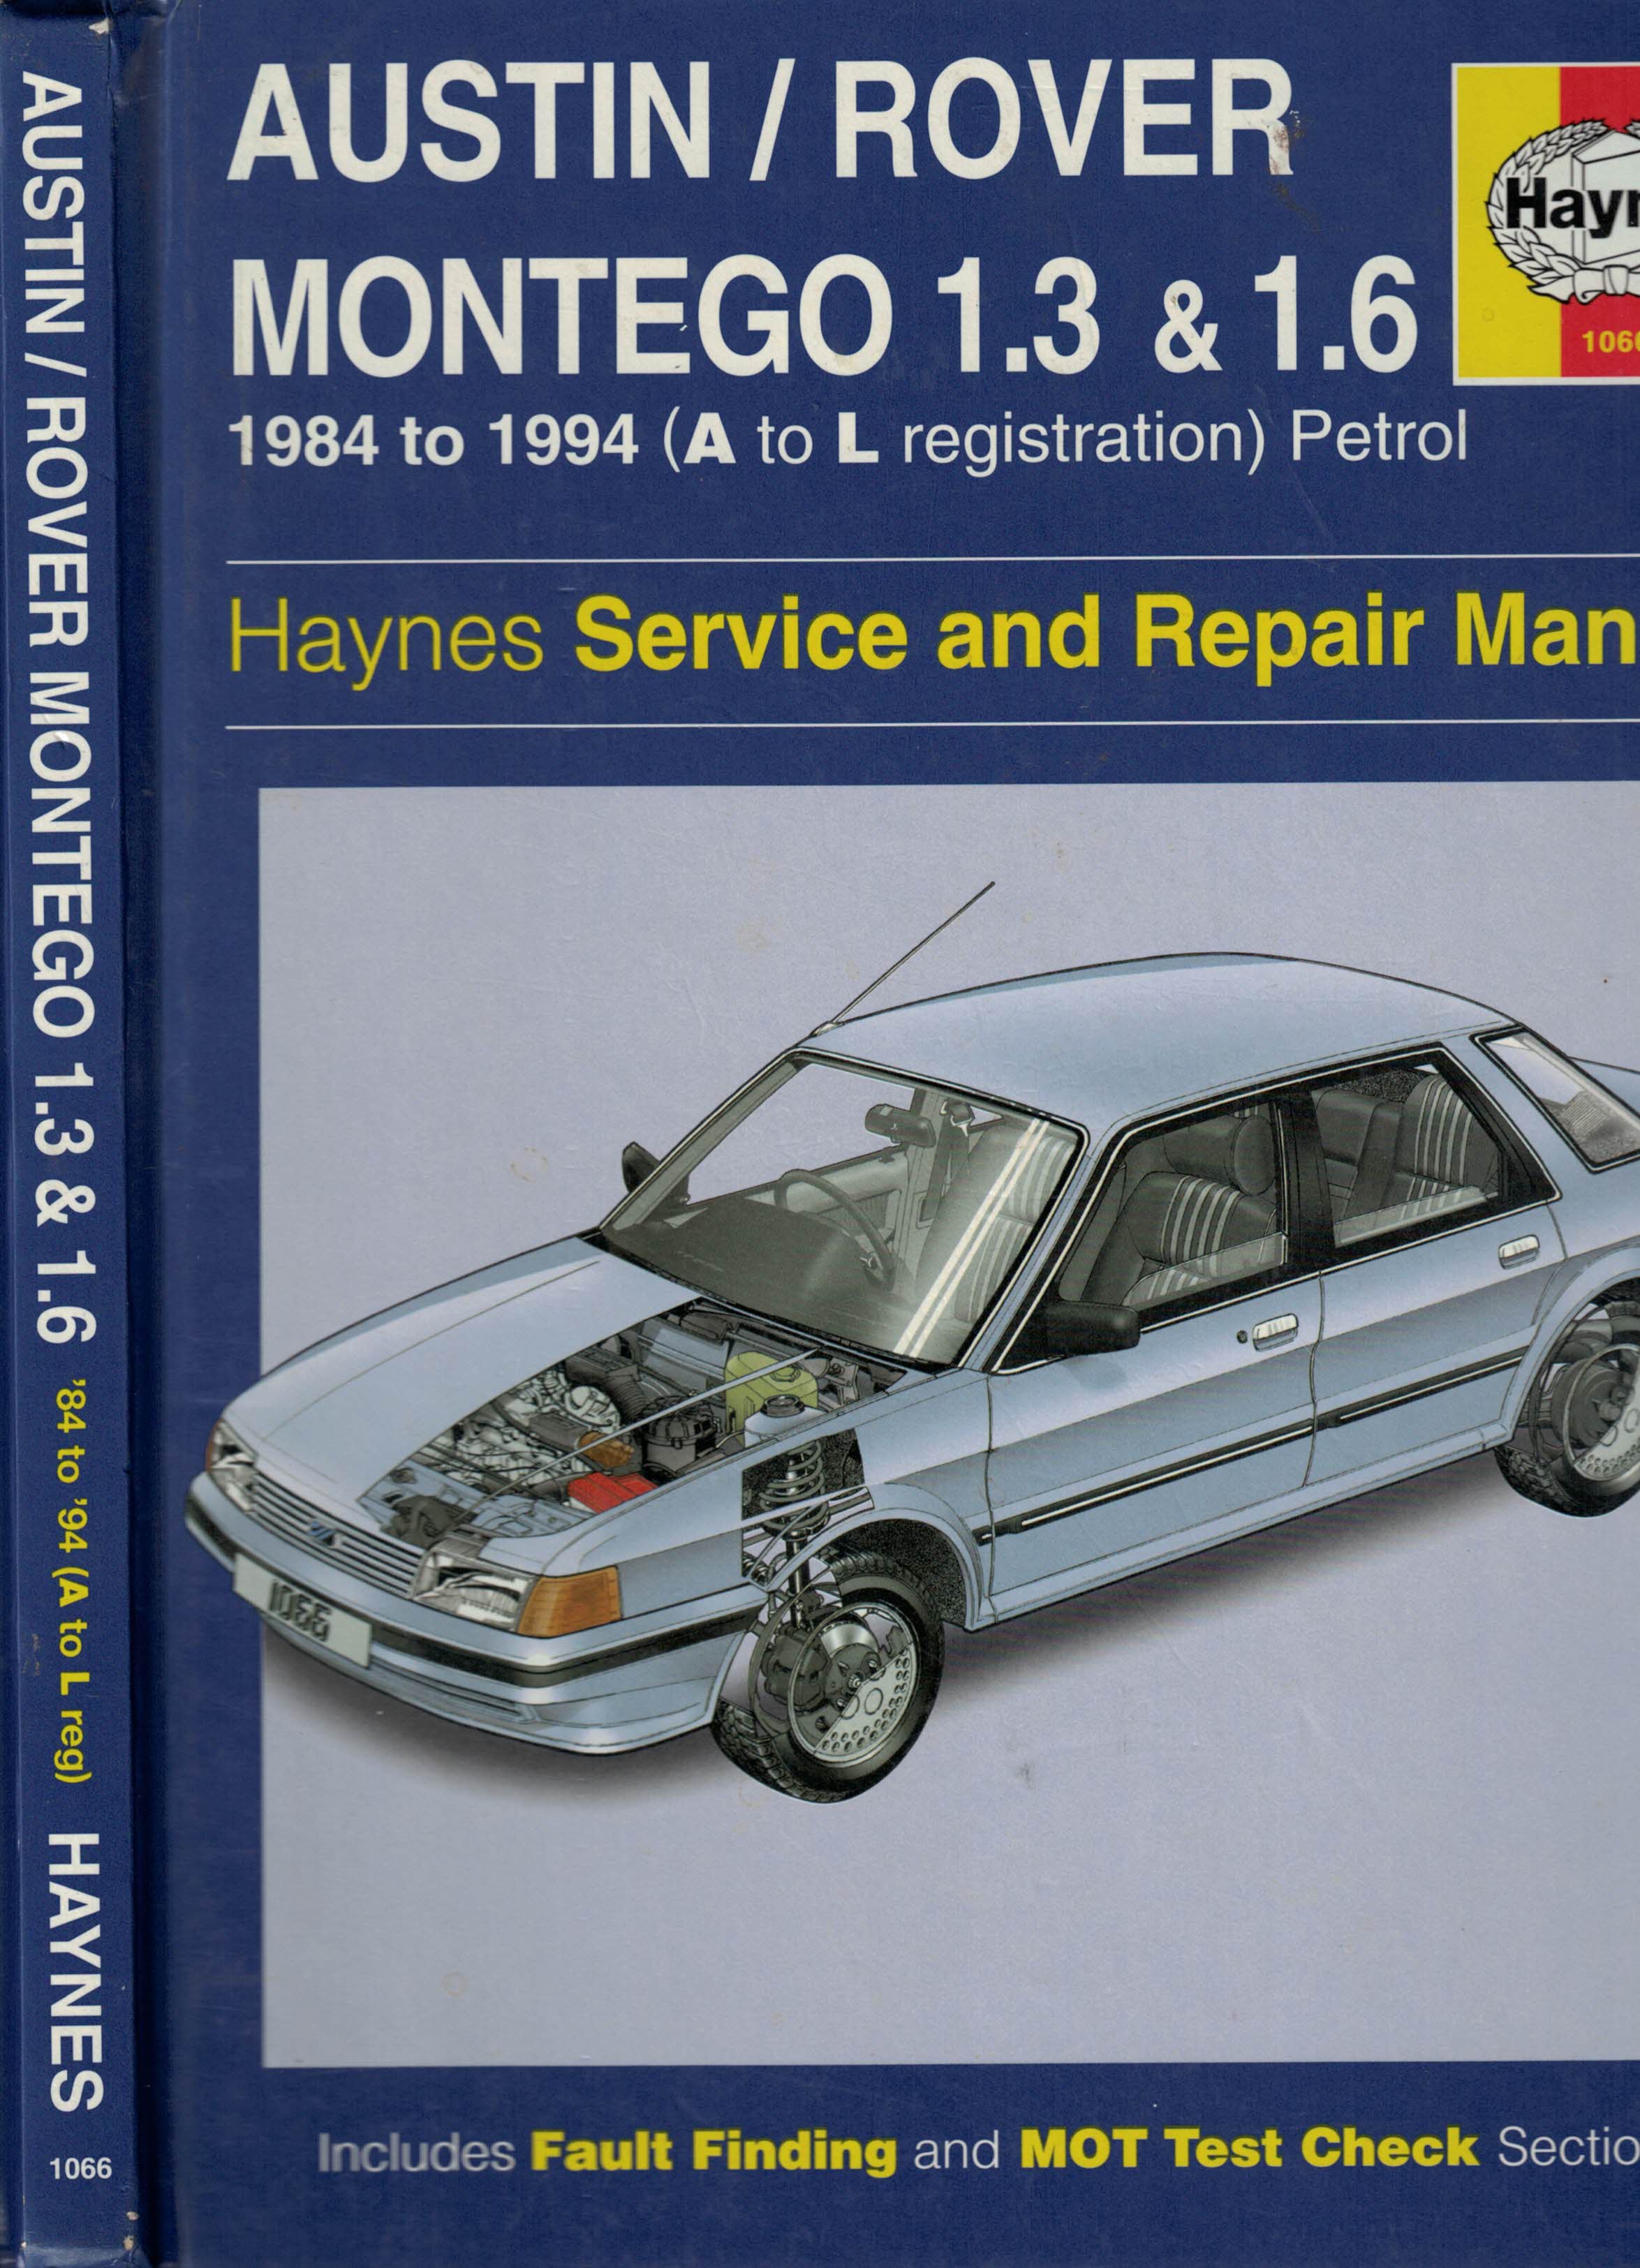 Austin (Rover) Montego 1.3 & 1.6 Litre Models with Petrol Engines. 1984 to 1994 (A to L Registration). Service and Repair Manual. Haynes Manual No 1066.